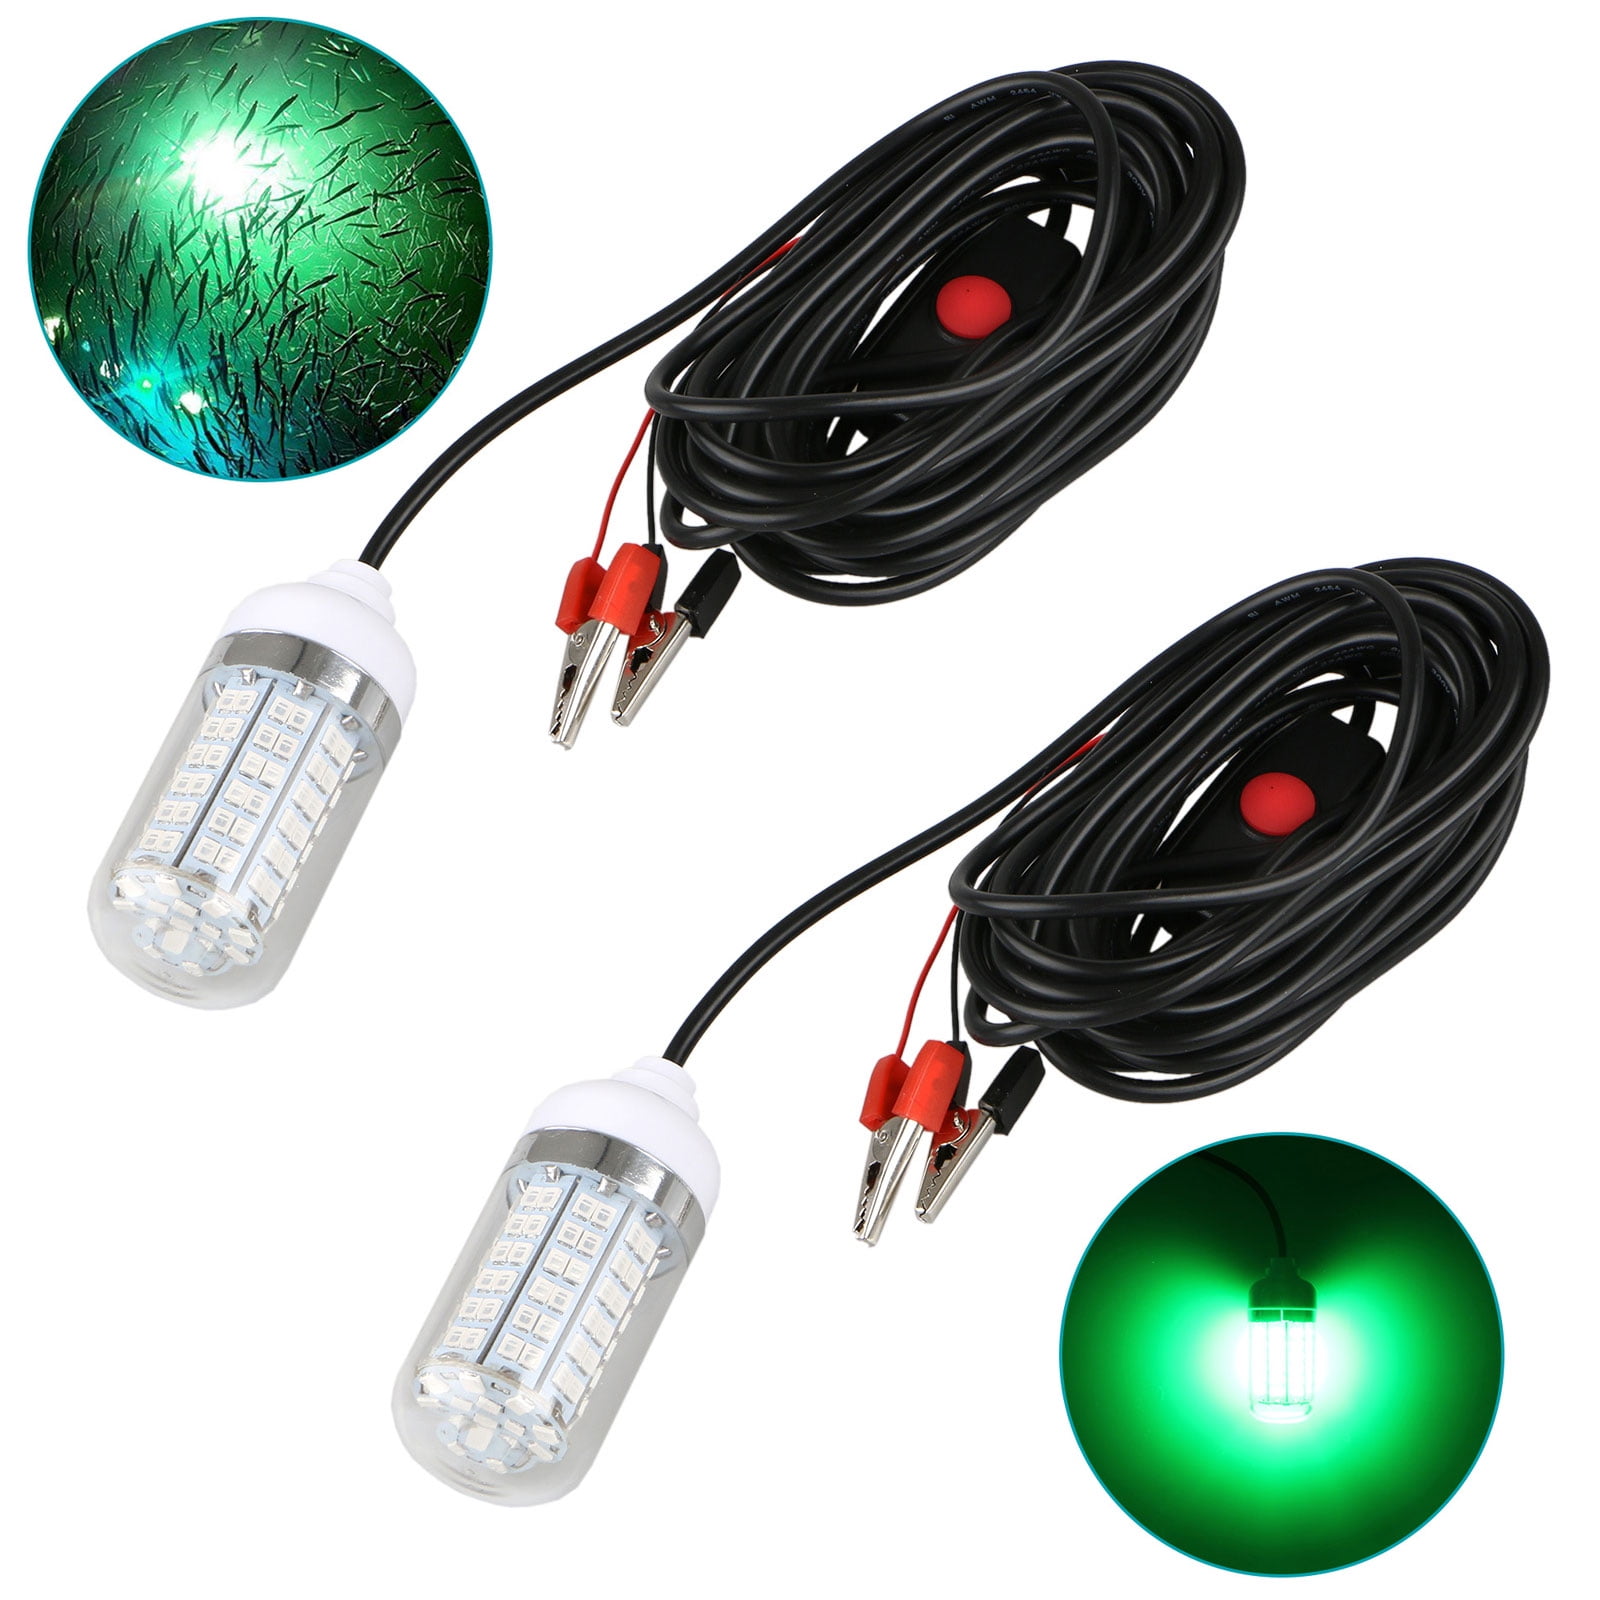 Doublele Fishing Light Underwater LED Lures Fish Finder Lamp Attracting Prawn Krill 12V